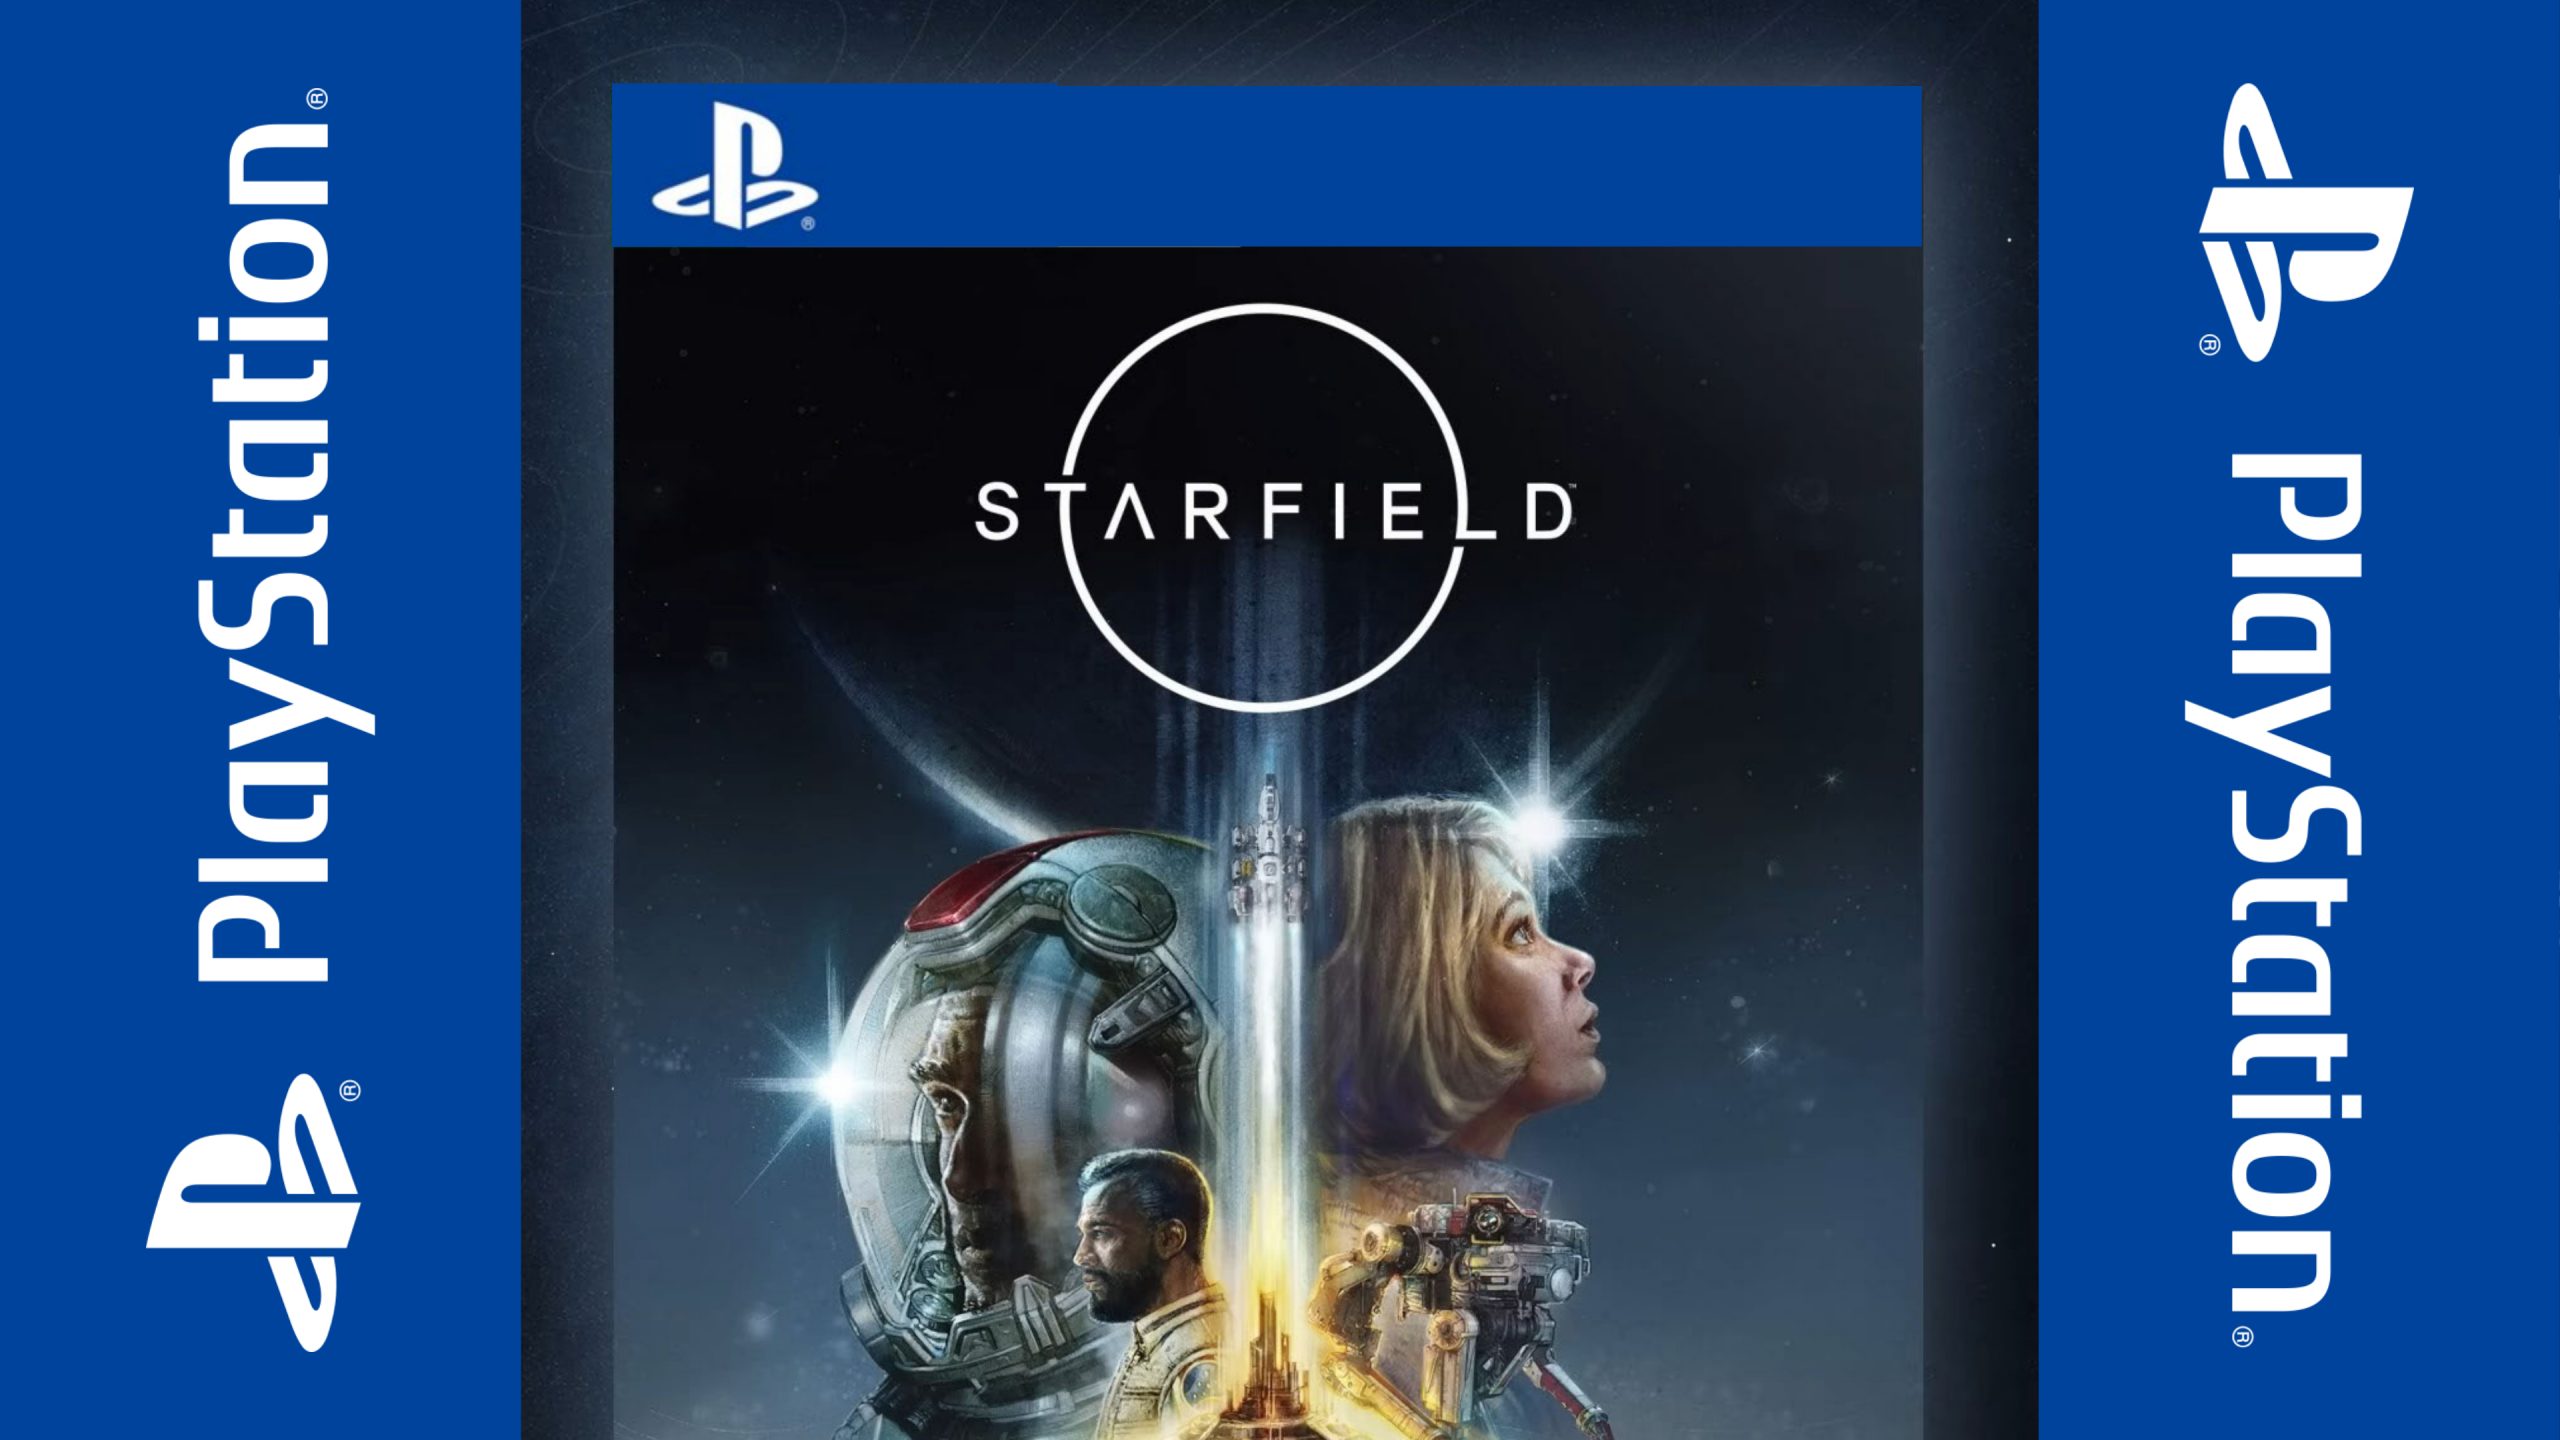 Starfield is more Oblivion than Skyrim, according to Xbox boss